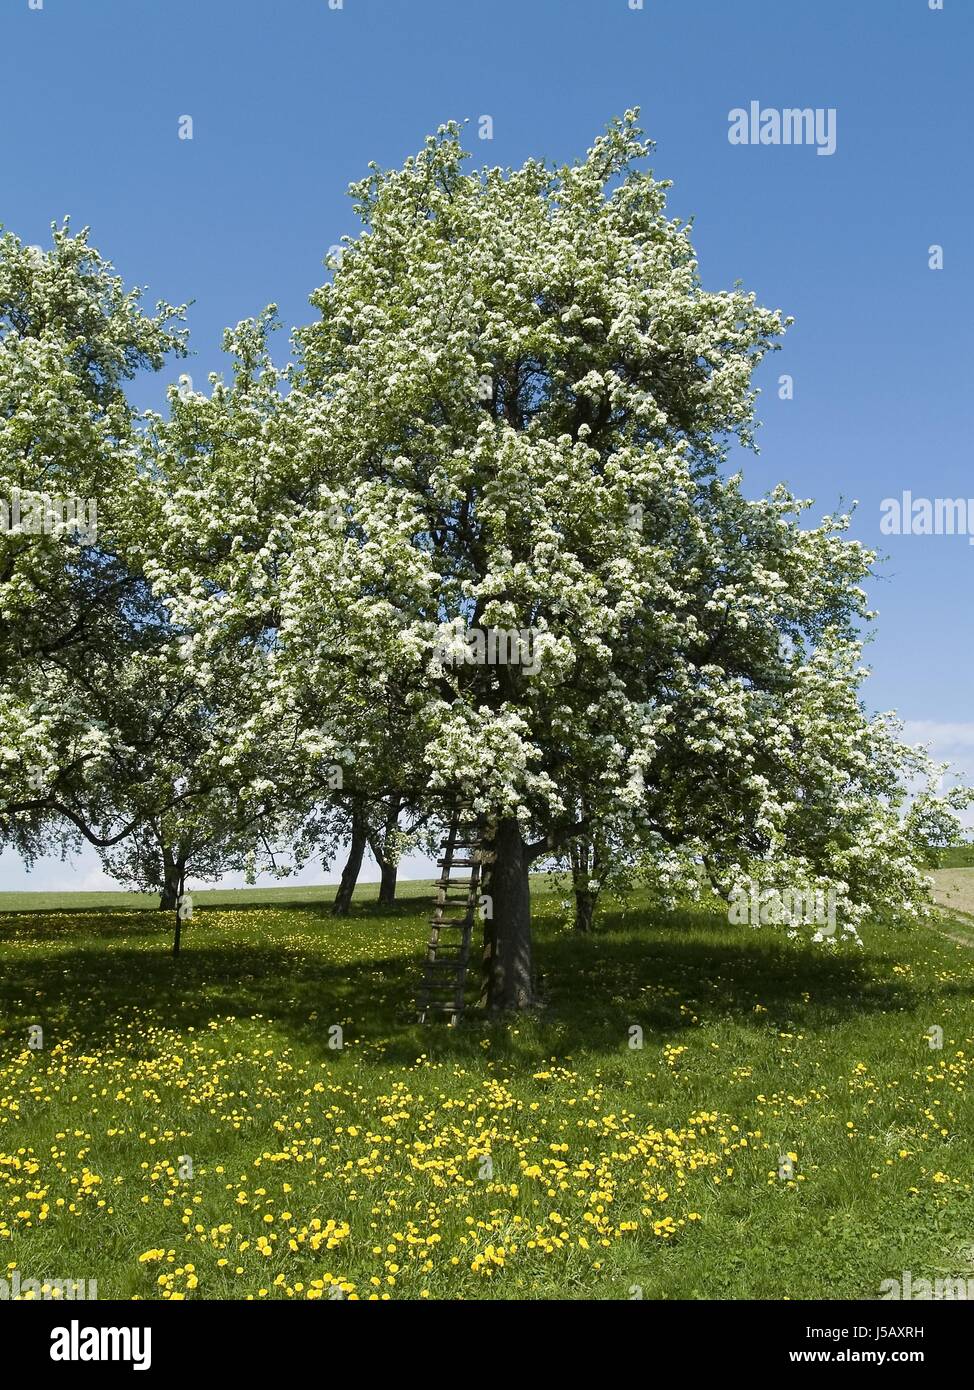 tree trees agriculture farming blossoms spring fields meadows bleed agrarian Stock Photo